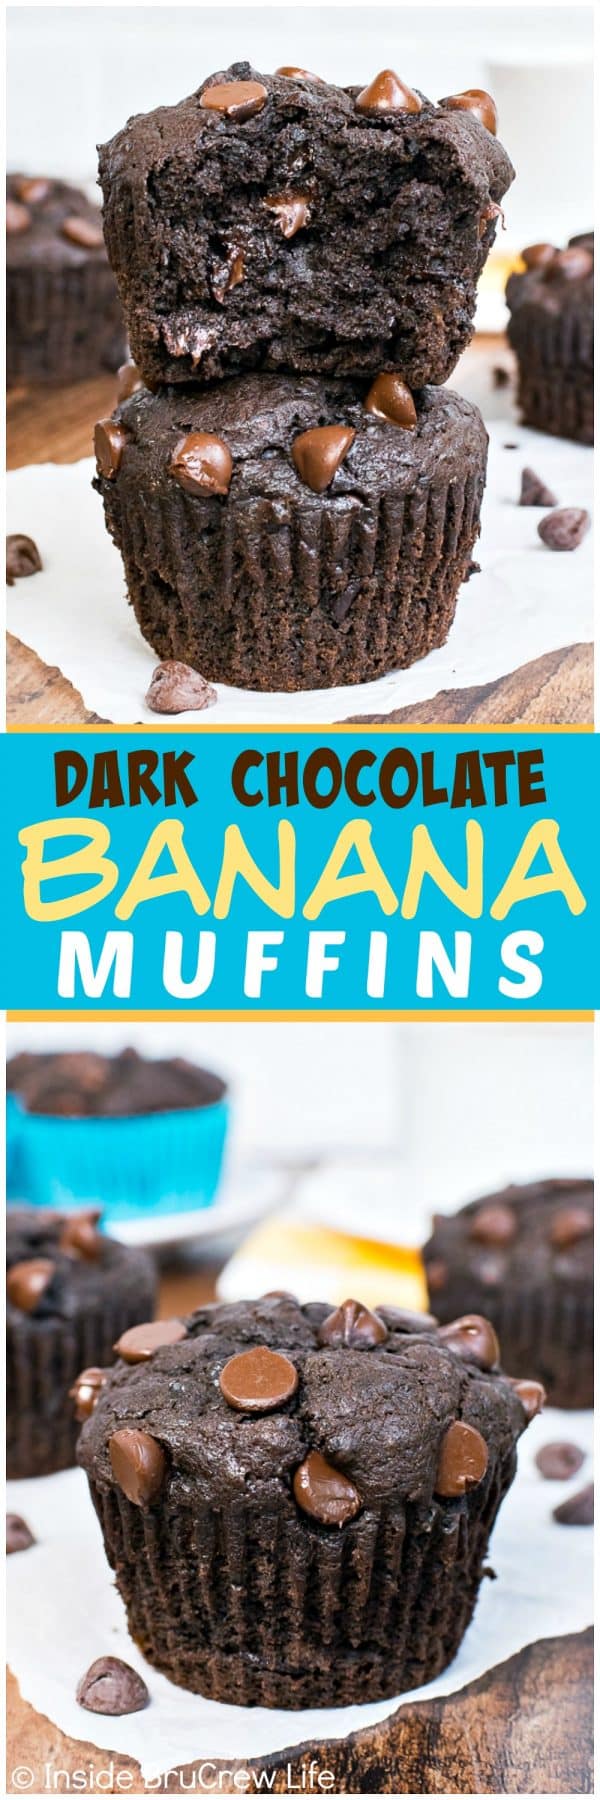 Dark Chocolate Banana Muffins - two times the dark chocolate and lots of ripe bananas give these muffins a rich and decadent texture. Great muffin recipe for busy mornings!